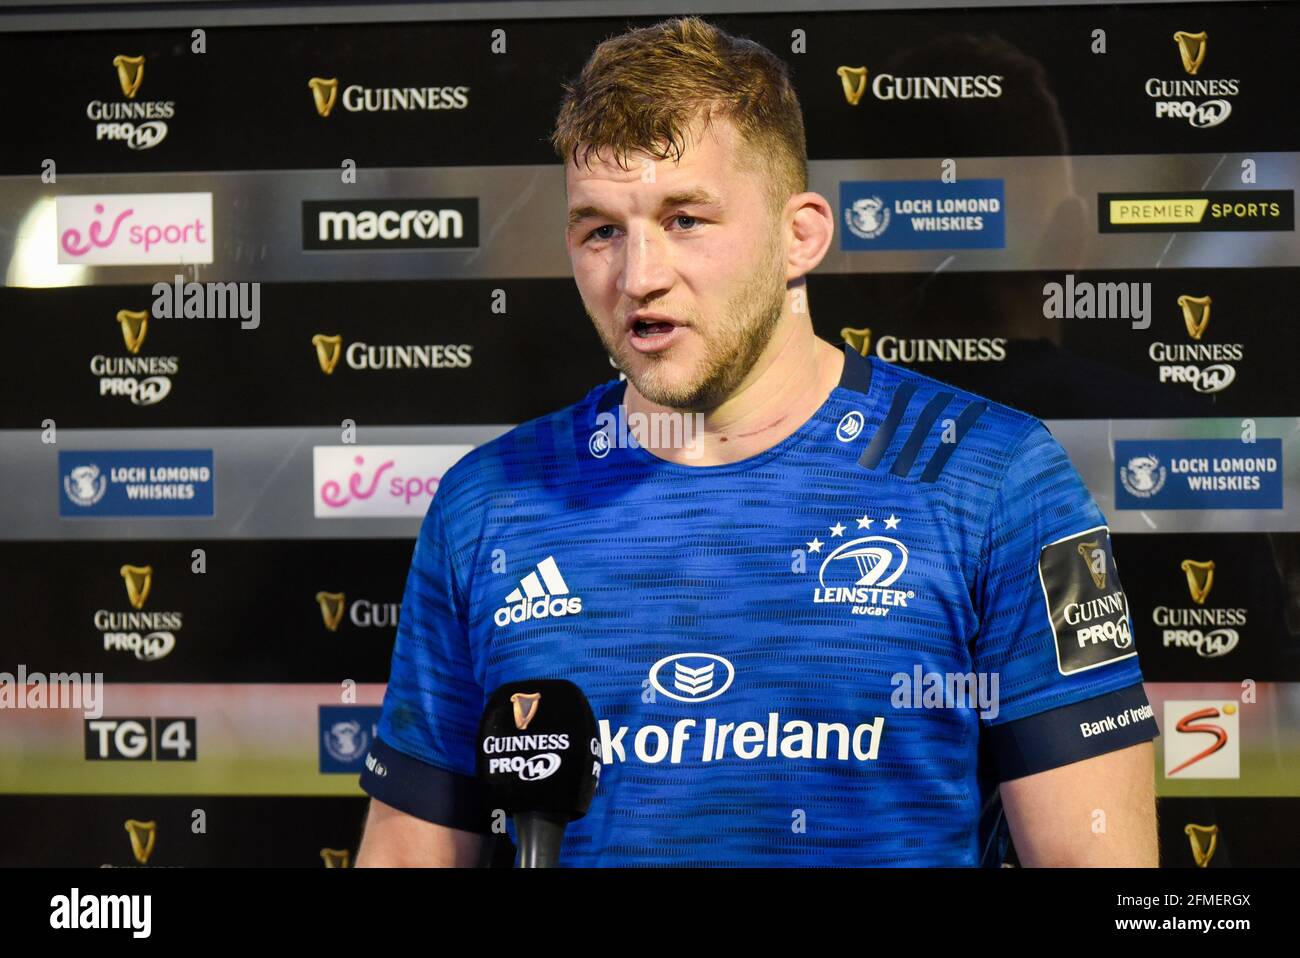 Ross MOLONY of Leinster during the TV interview after the Guinness PRO14 Rainbow Cup Round 2 match between Connacht Rugby and Leinster Rugby at the Sportsground in Galway, Ireland on May 8,